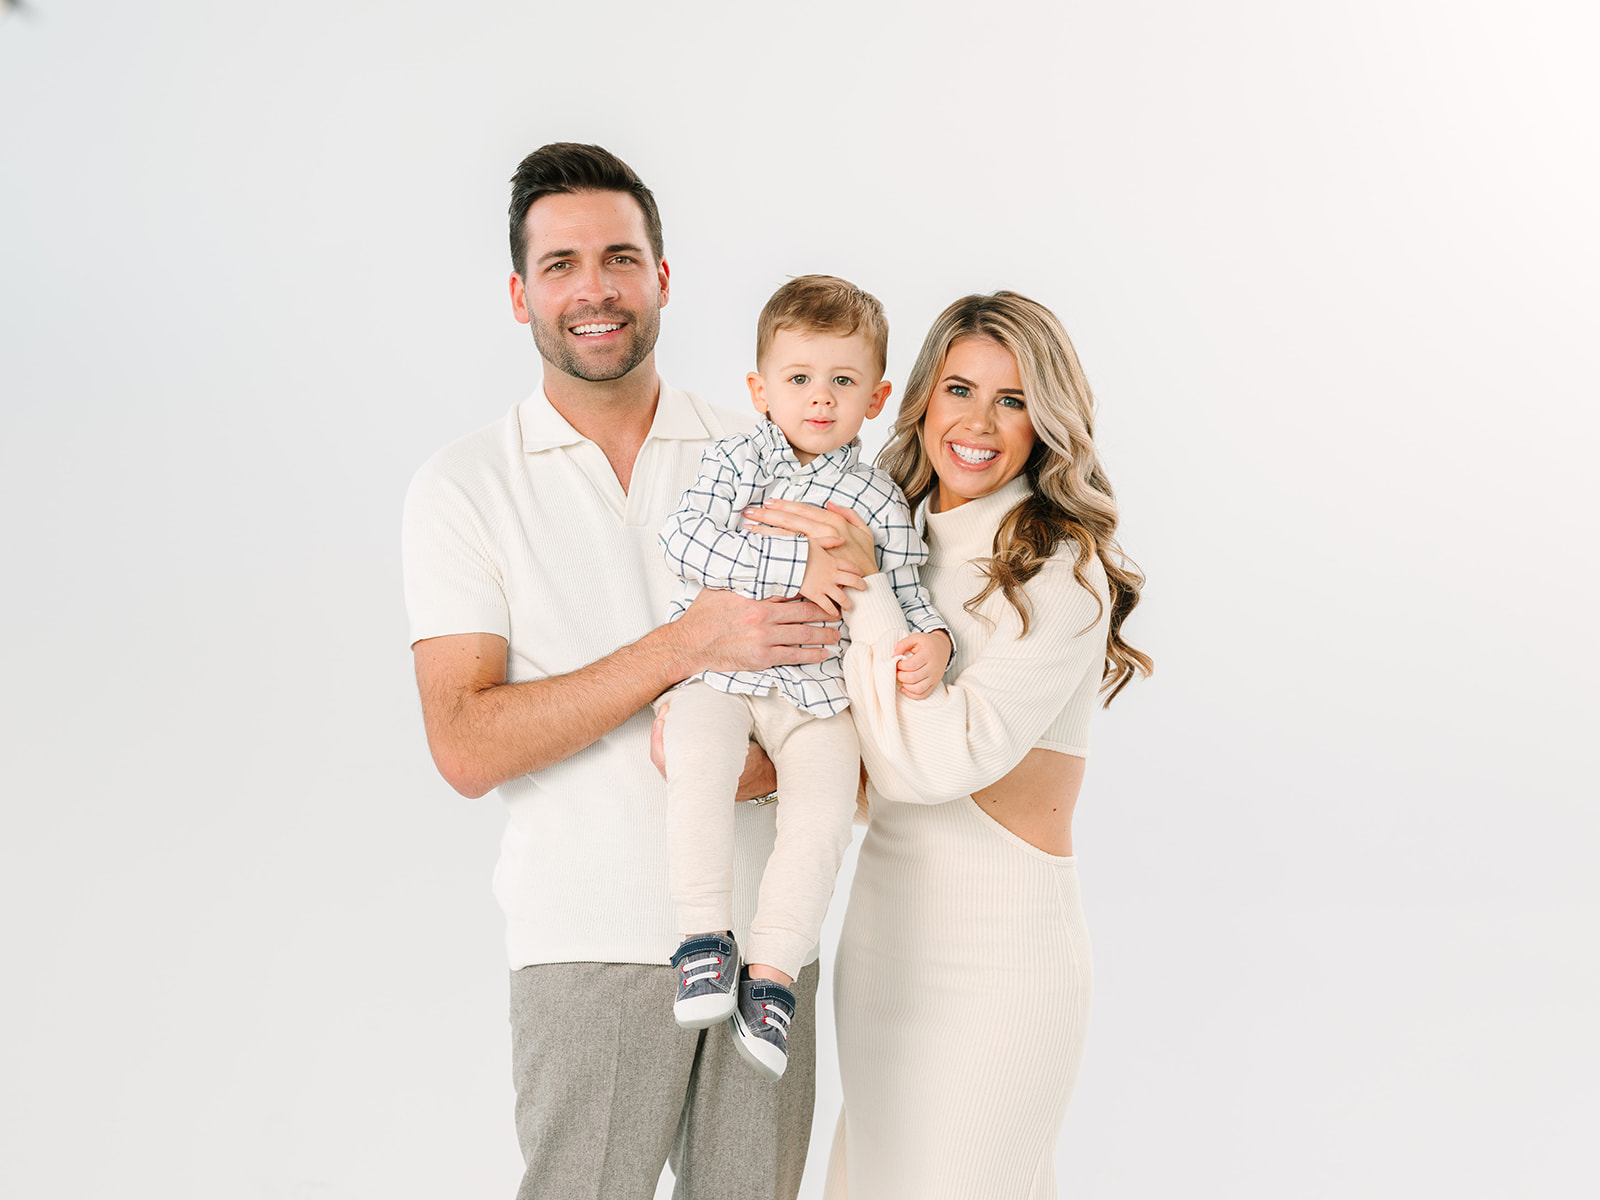 chic sophisticated family portraits in studio tampa